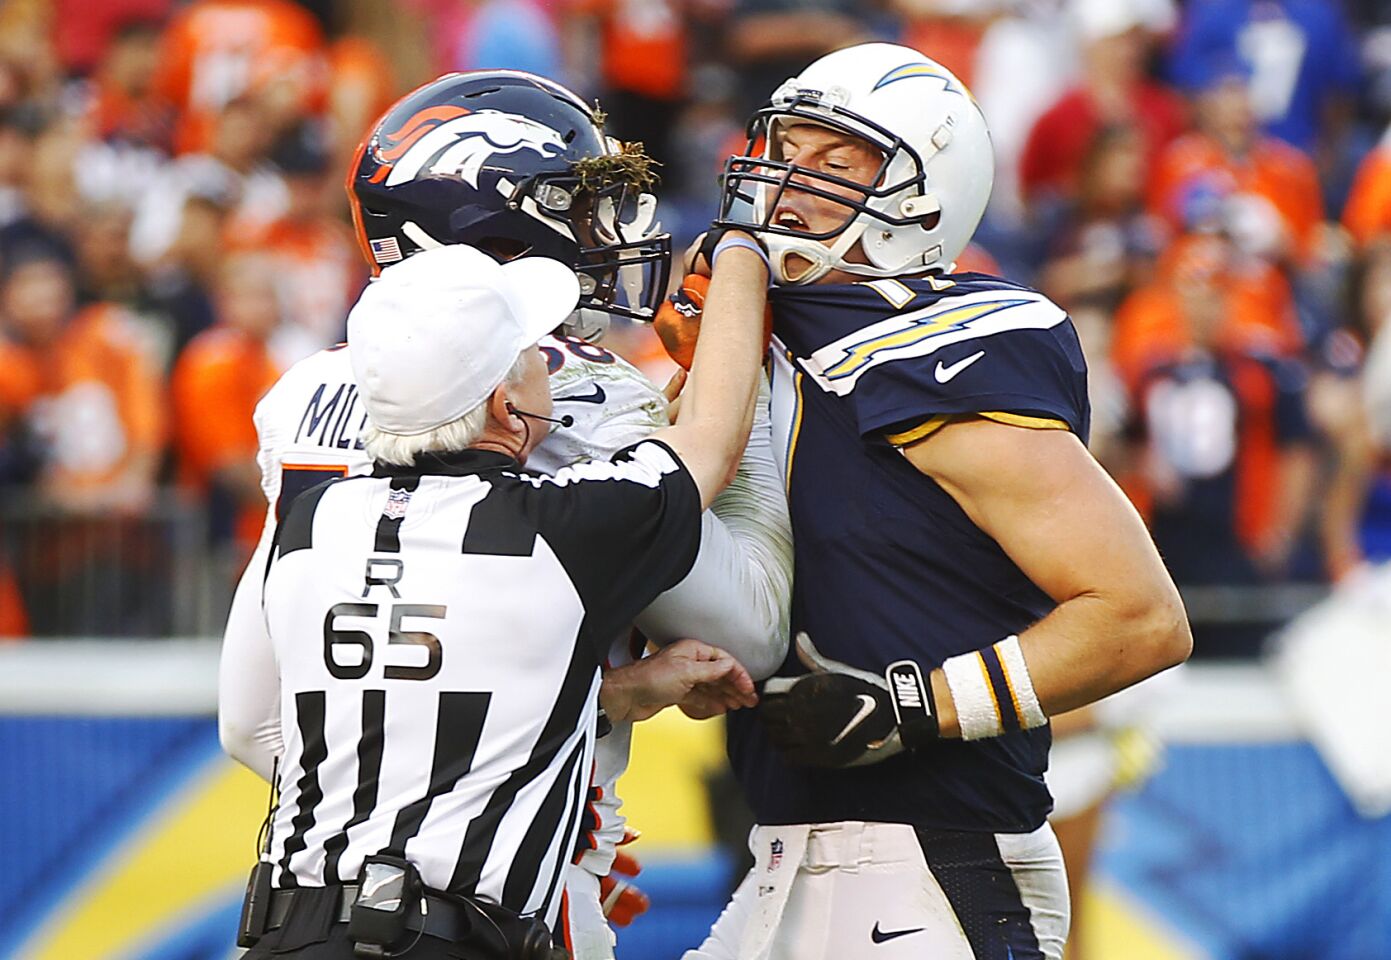 Chargers Philip Rivers and Broncos Von Miller get into it during the final moments of the 4th quarter on Dec. 6, 2015.